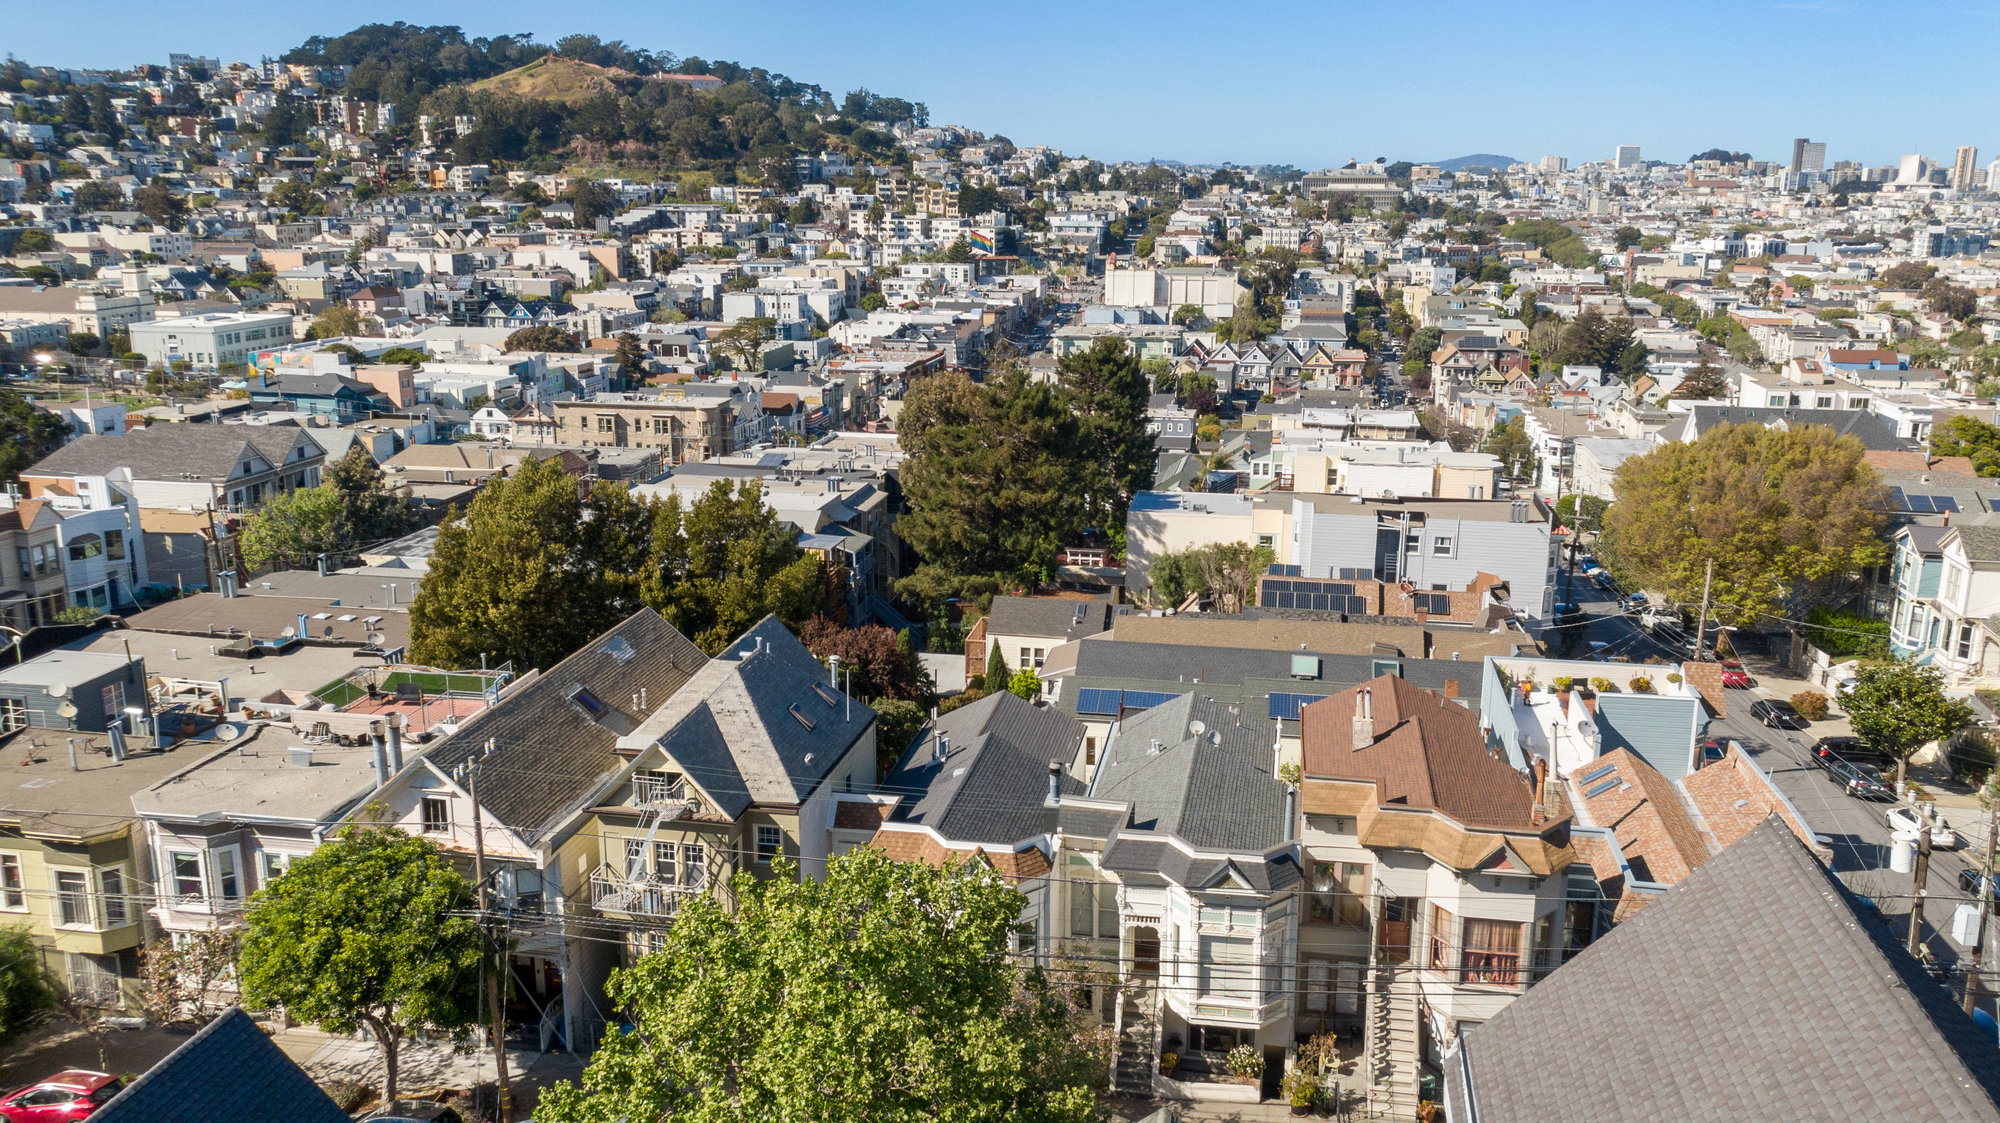 Property Photo: Aerial view of 4160-4162 20th Street, showing the home and San Francisco beyond